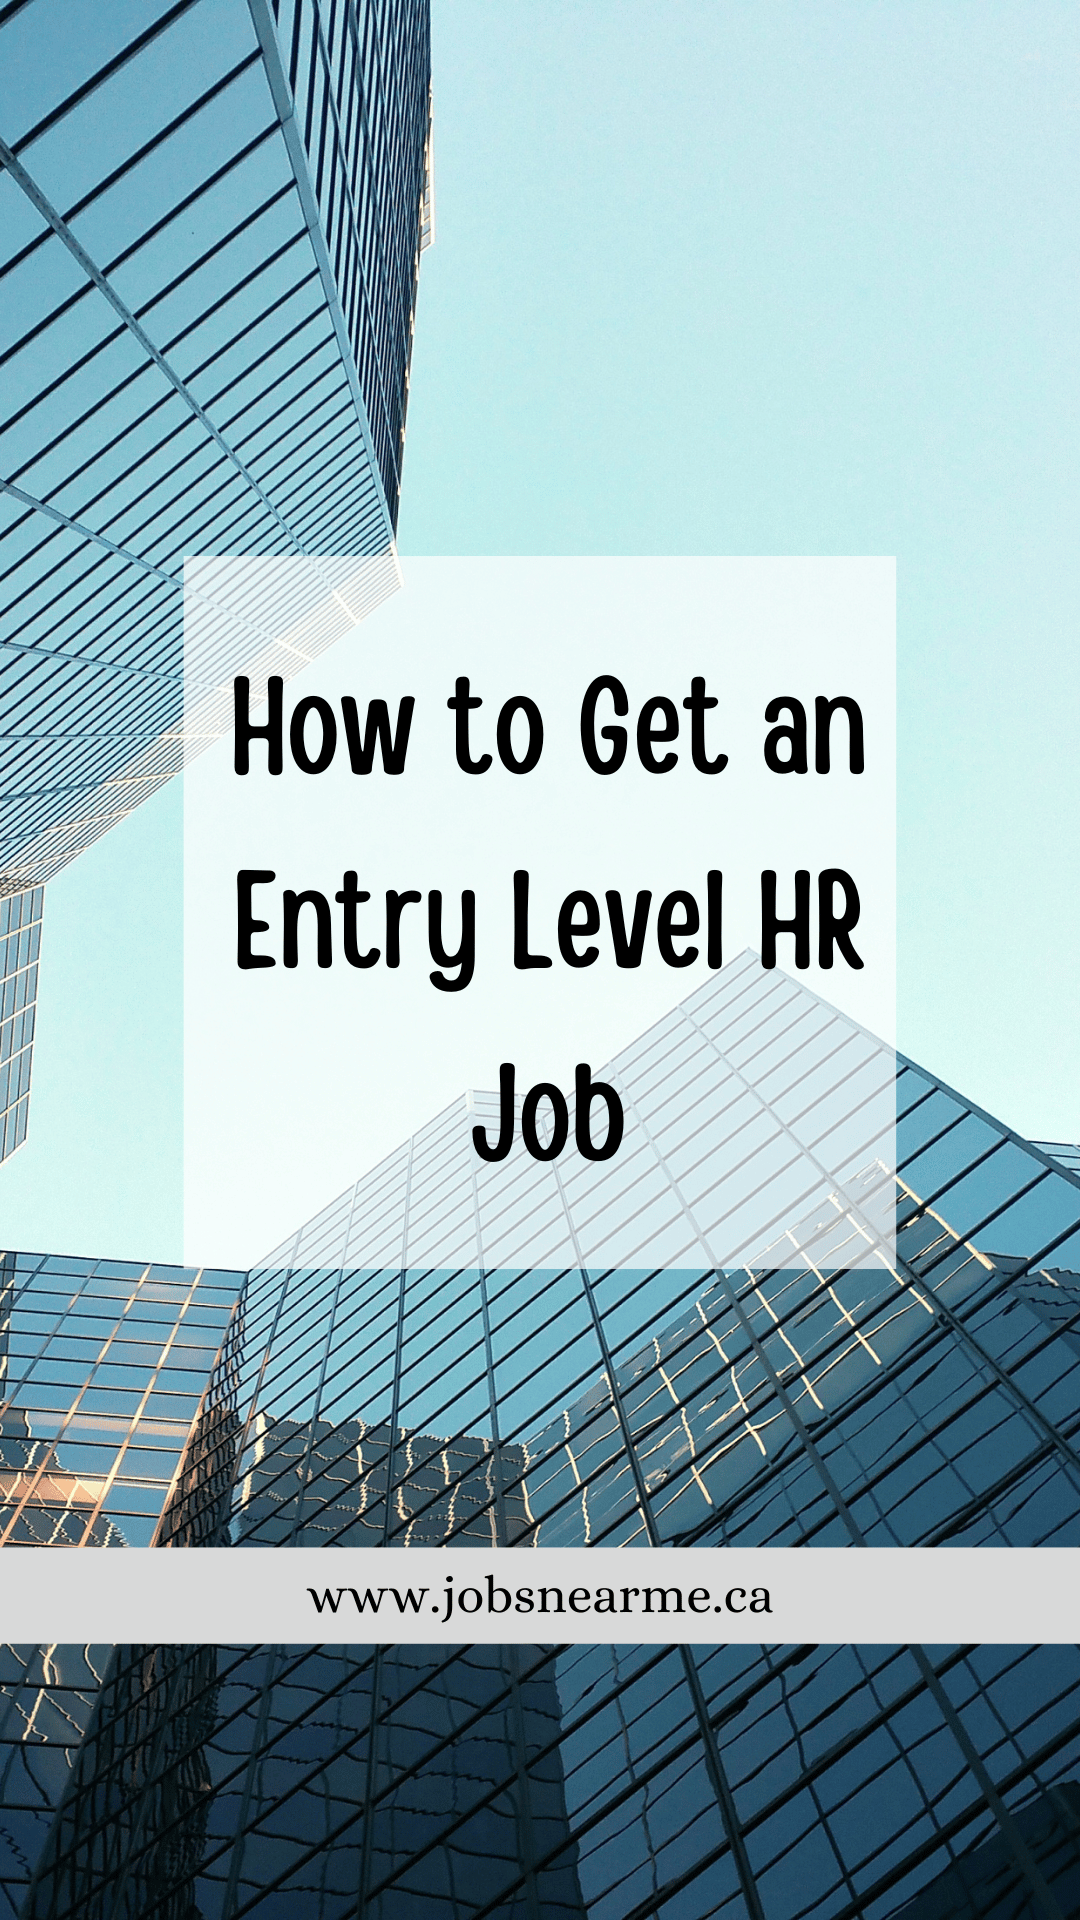 How to Get an Entry Level HR Job